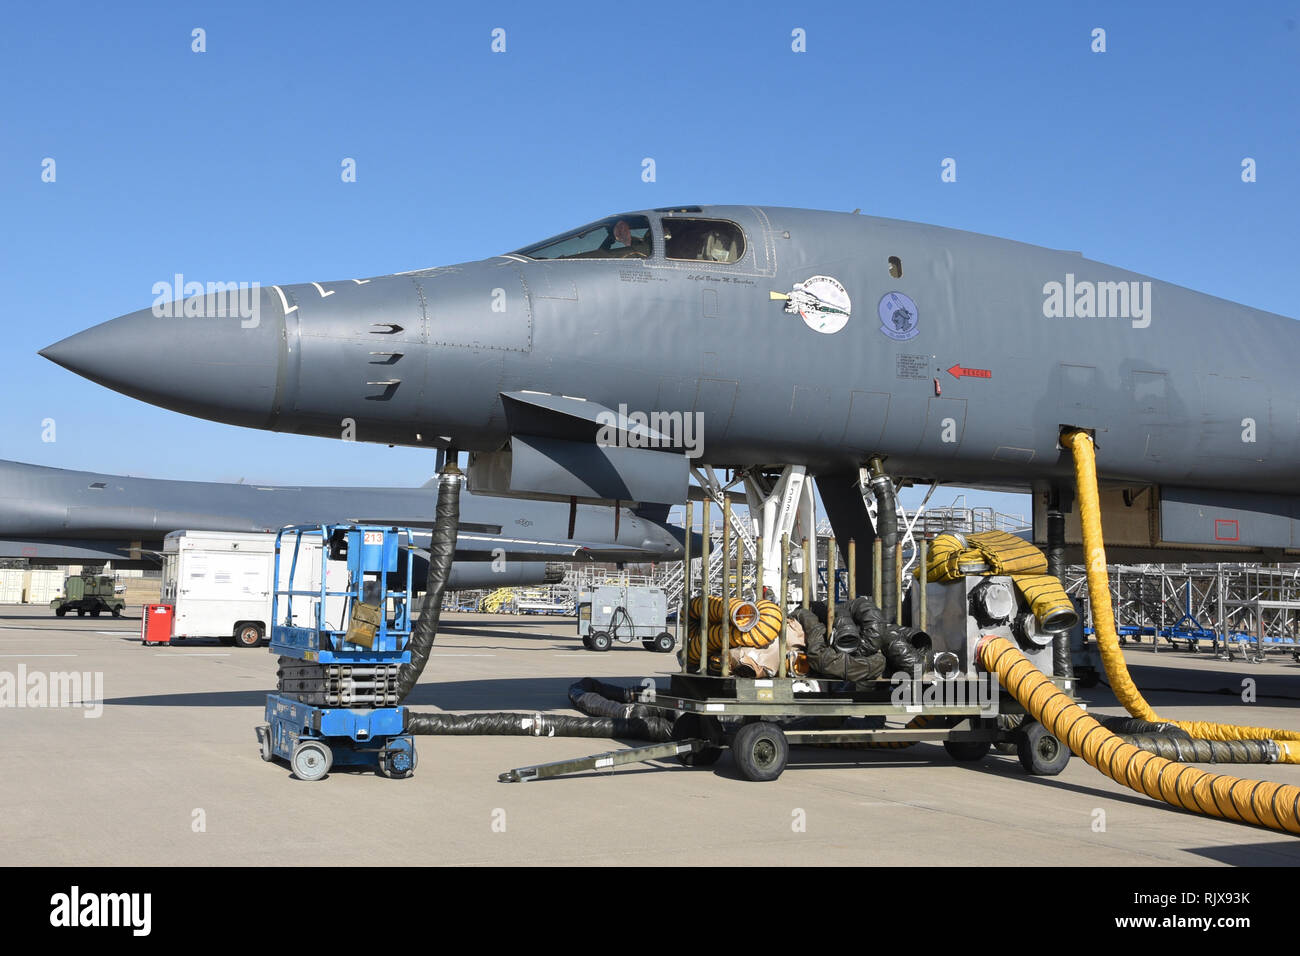 Boeing B-1B Lancer, serial # 86-0098, wearing 'Midnight Train' nose-art is shown at the Maintenance, Repair and Overhaul Training Center Jan. 17, 2019, Tinker Air Force Base, Oklahoma. MROTC is a facility used for heavy aircraft maintenance in a public/private partnership between the Air Force and Boeing. (U.S. Air Force photo/Greg L. Davis) Stock Photo